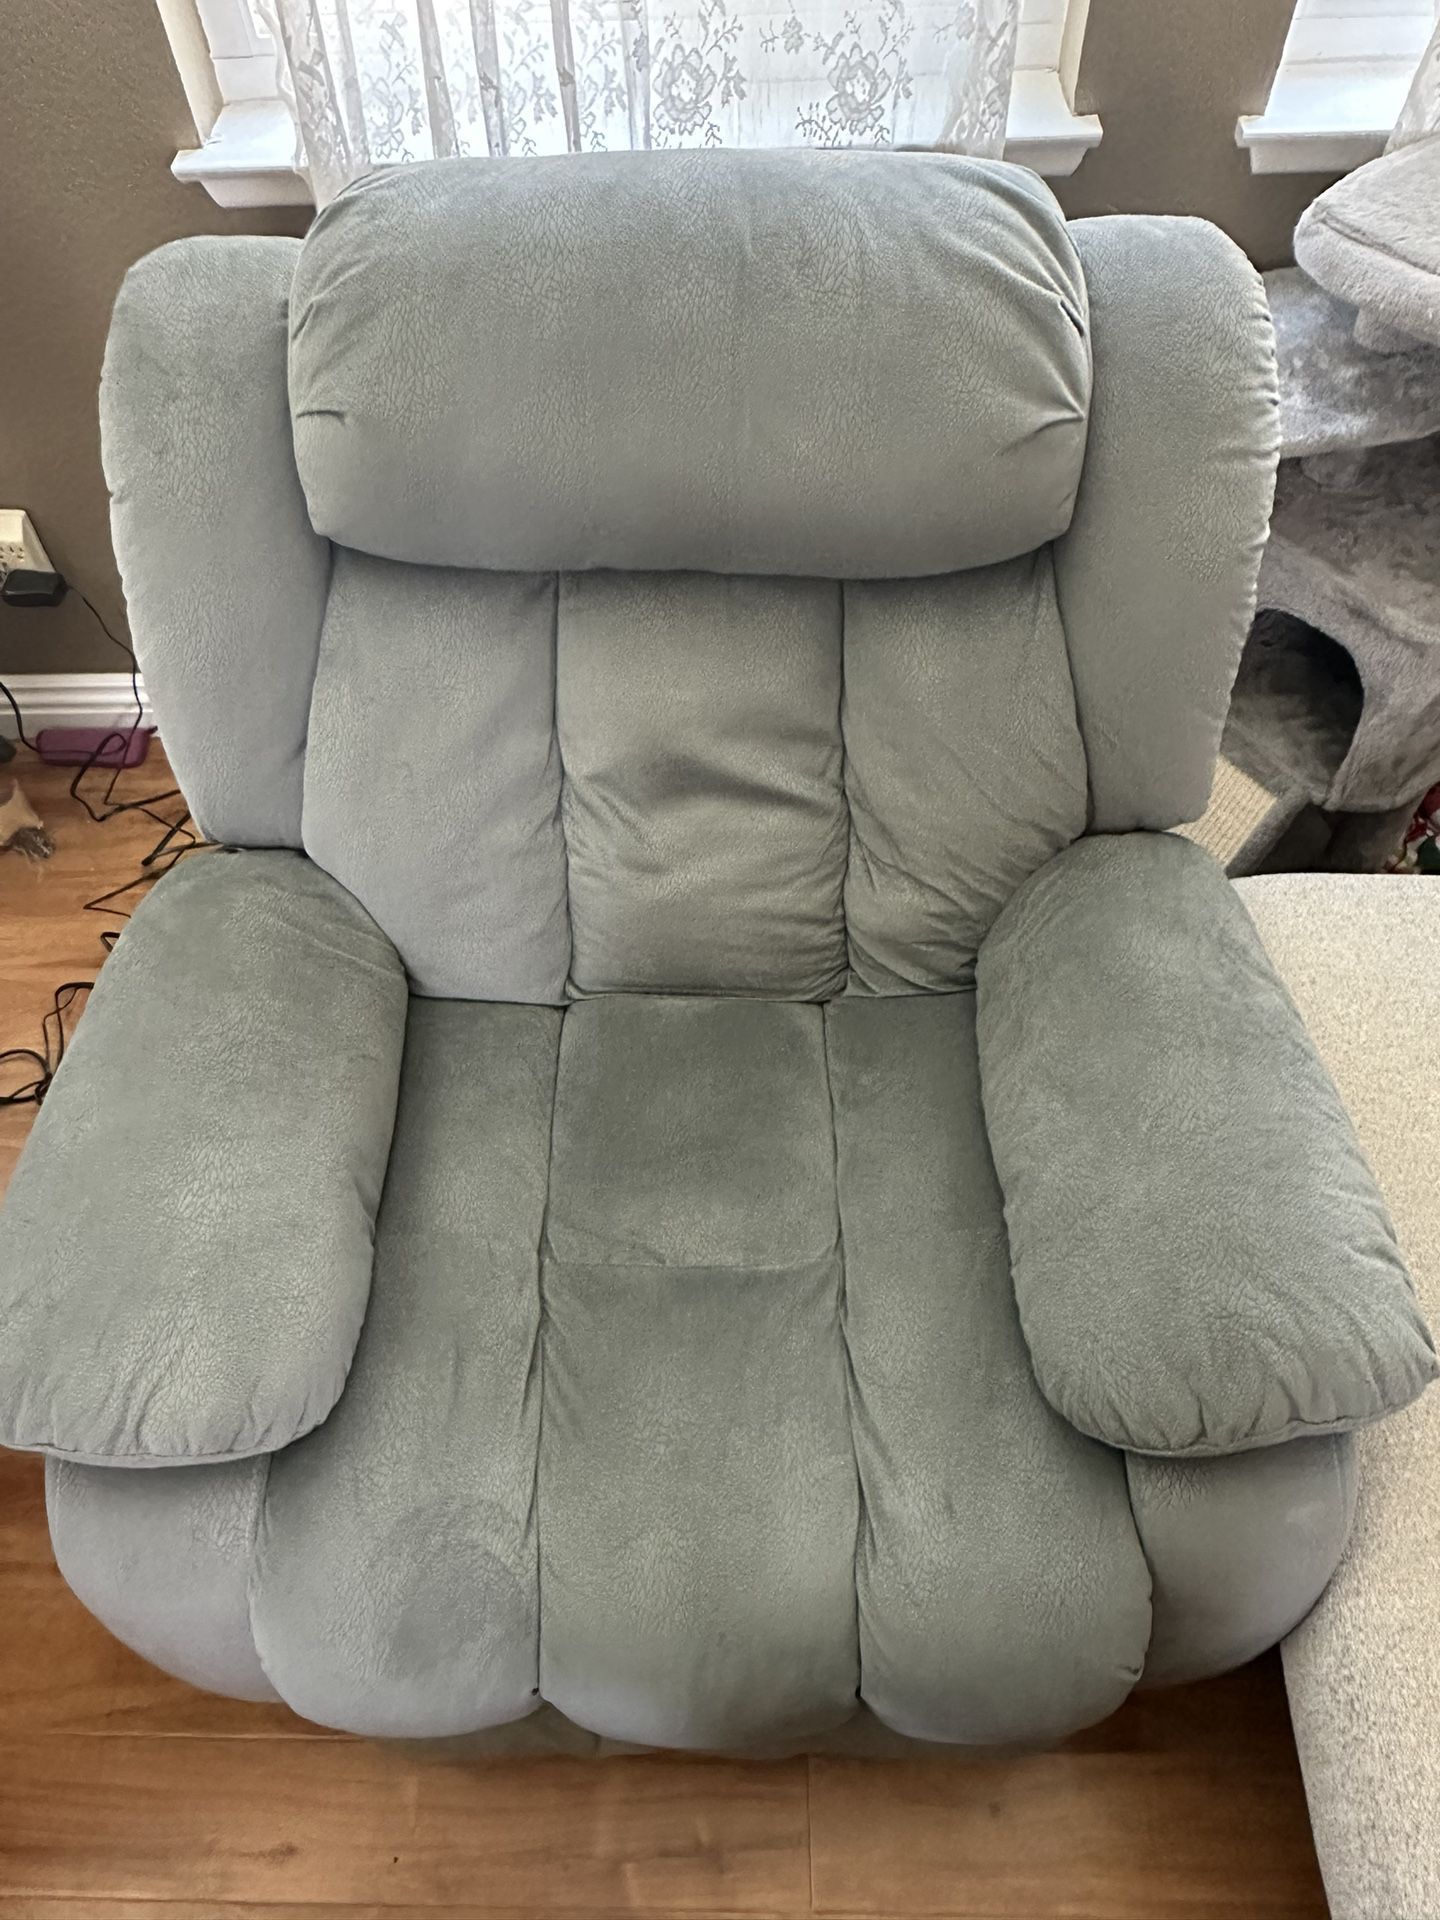 OBO MUST GO! ANJ LIFT CHAIR WITH MASSAGE